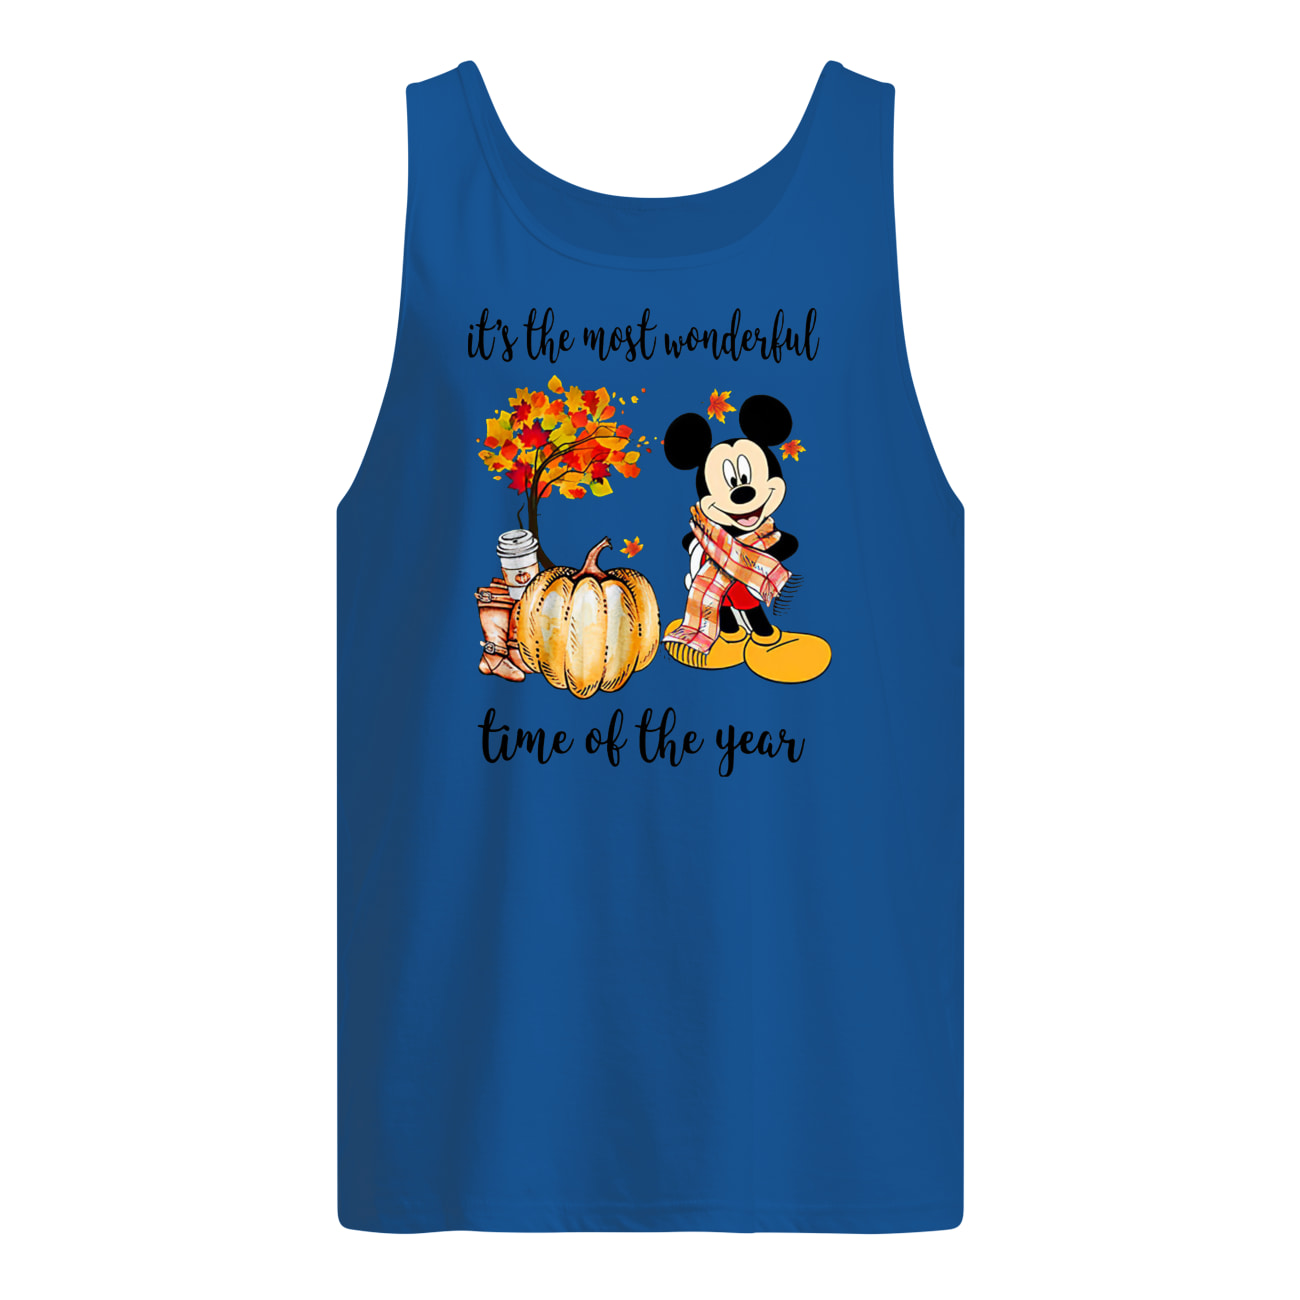 Mickey mouse it’s the most wonderful time of the year tank top